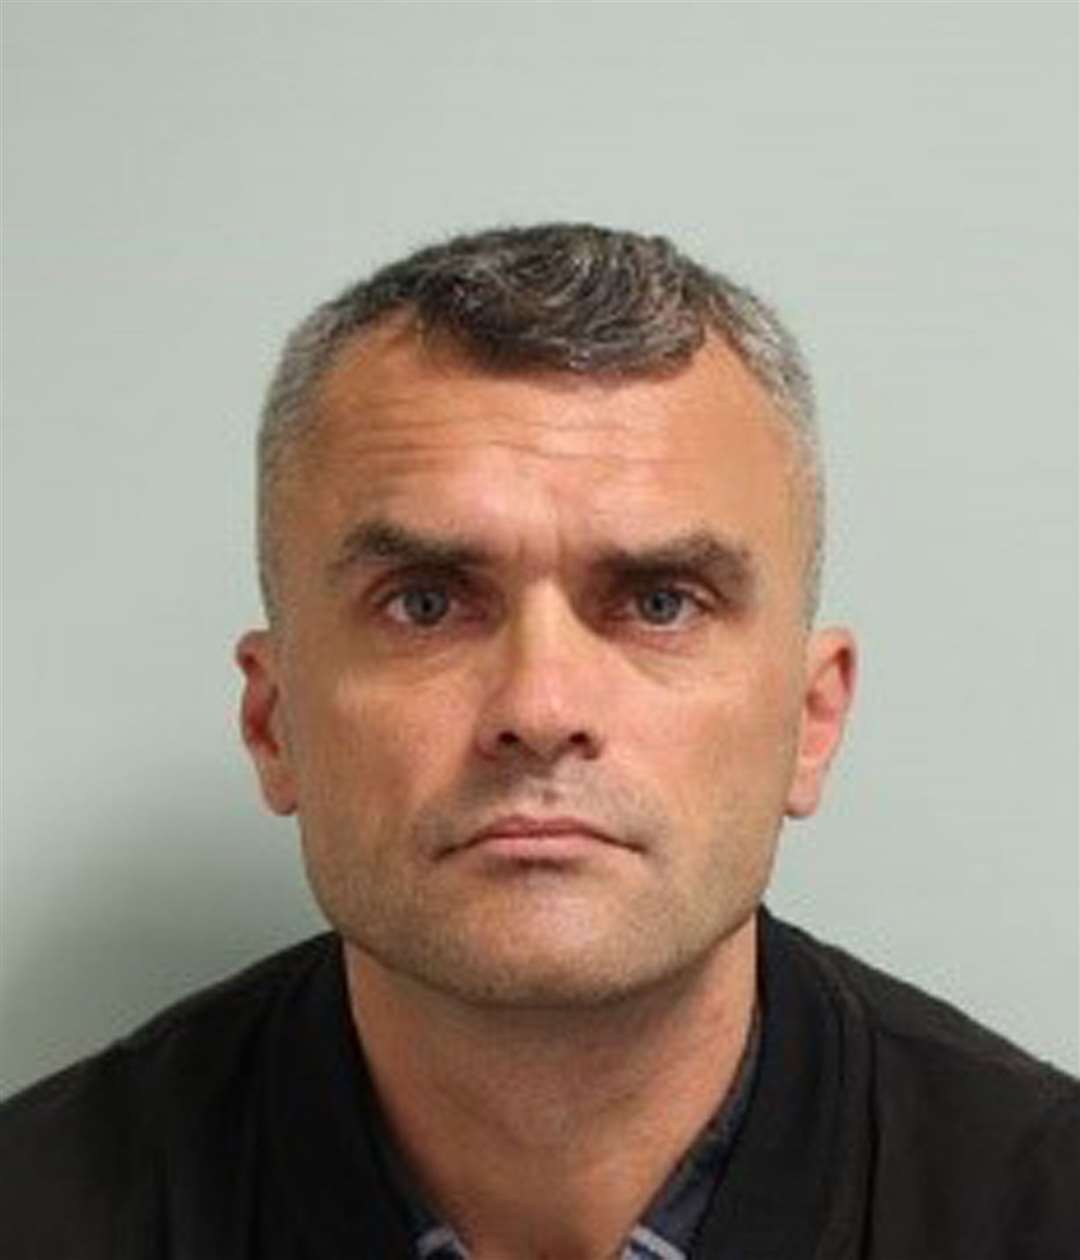 Tomas Vaitkevicius, 45, was jailed for causing or allowing the death of their child, Eva (Met Police/PA)